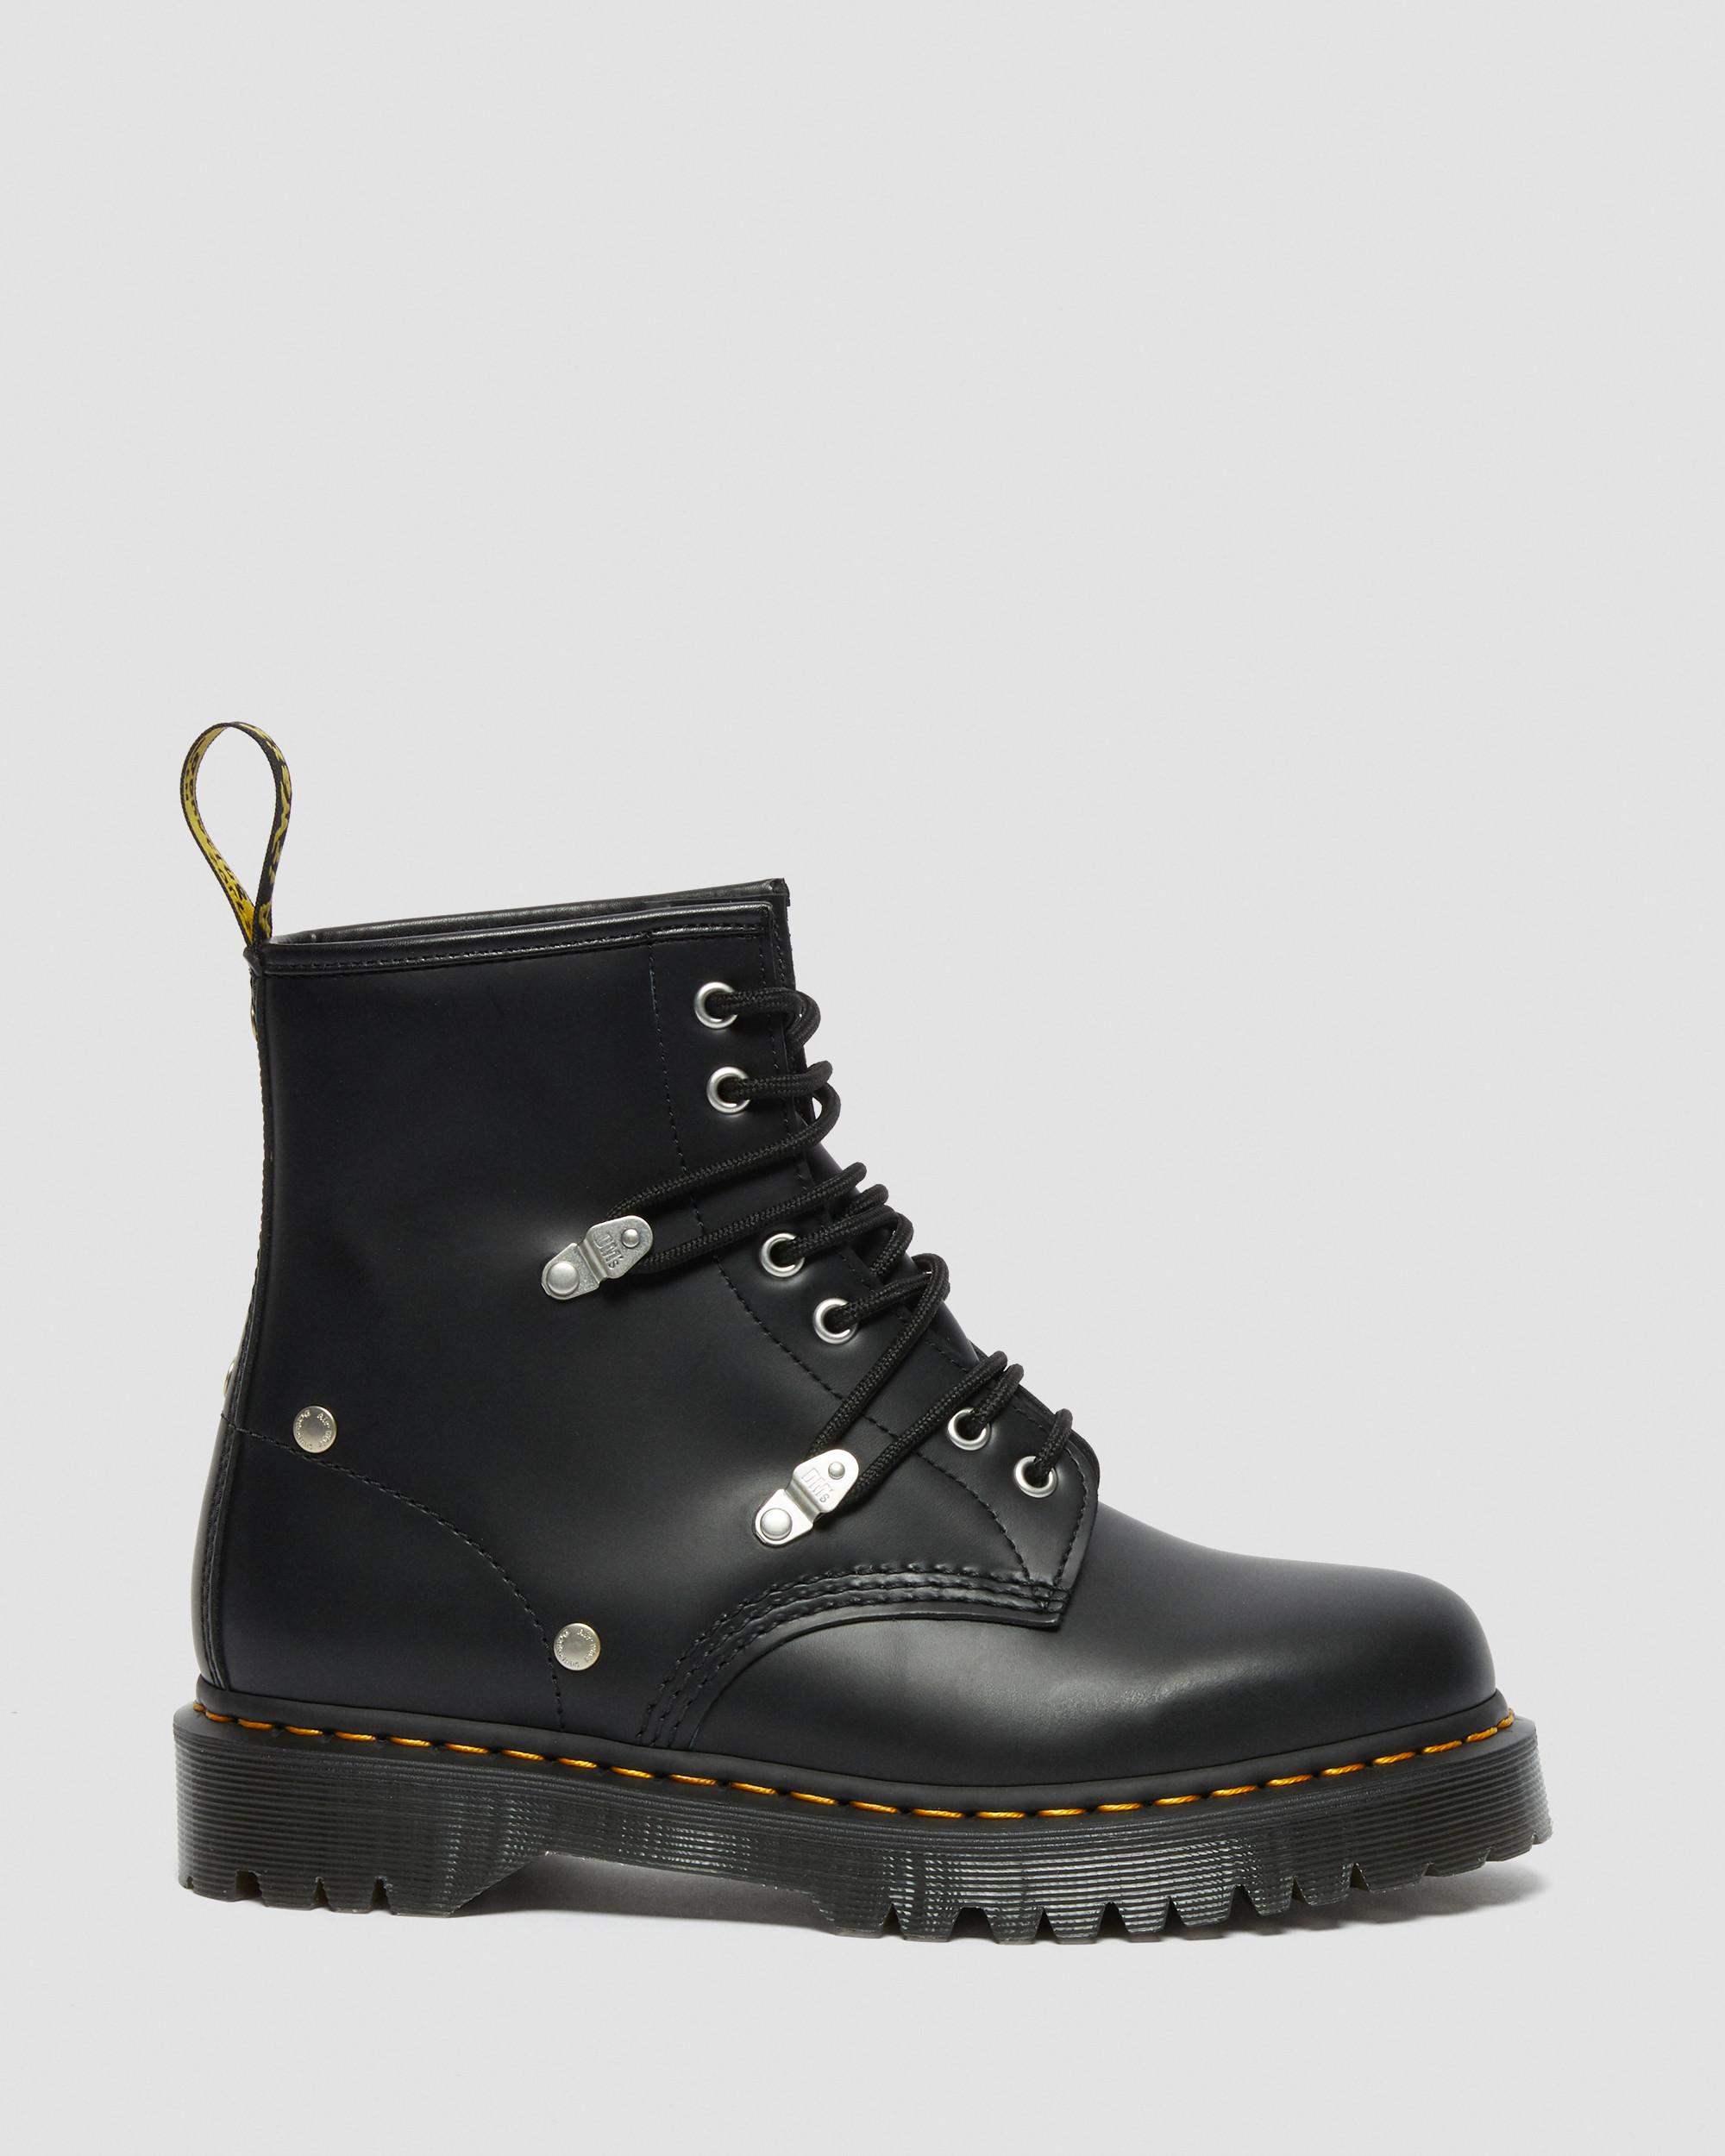 zona Musgo grandioso 1460 Bex Stud Leather Lace Up Boots | Dr. Martens